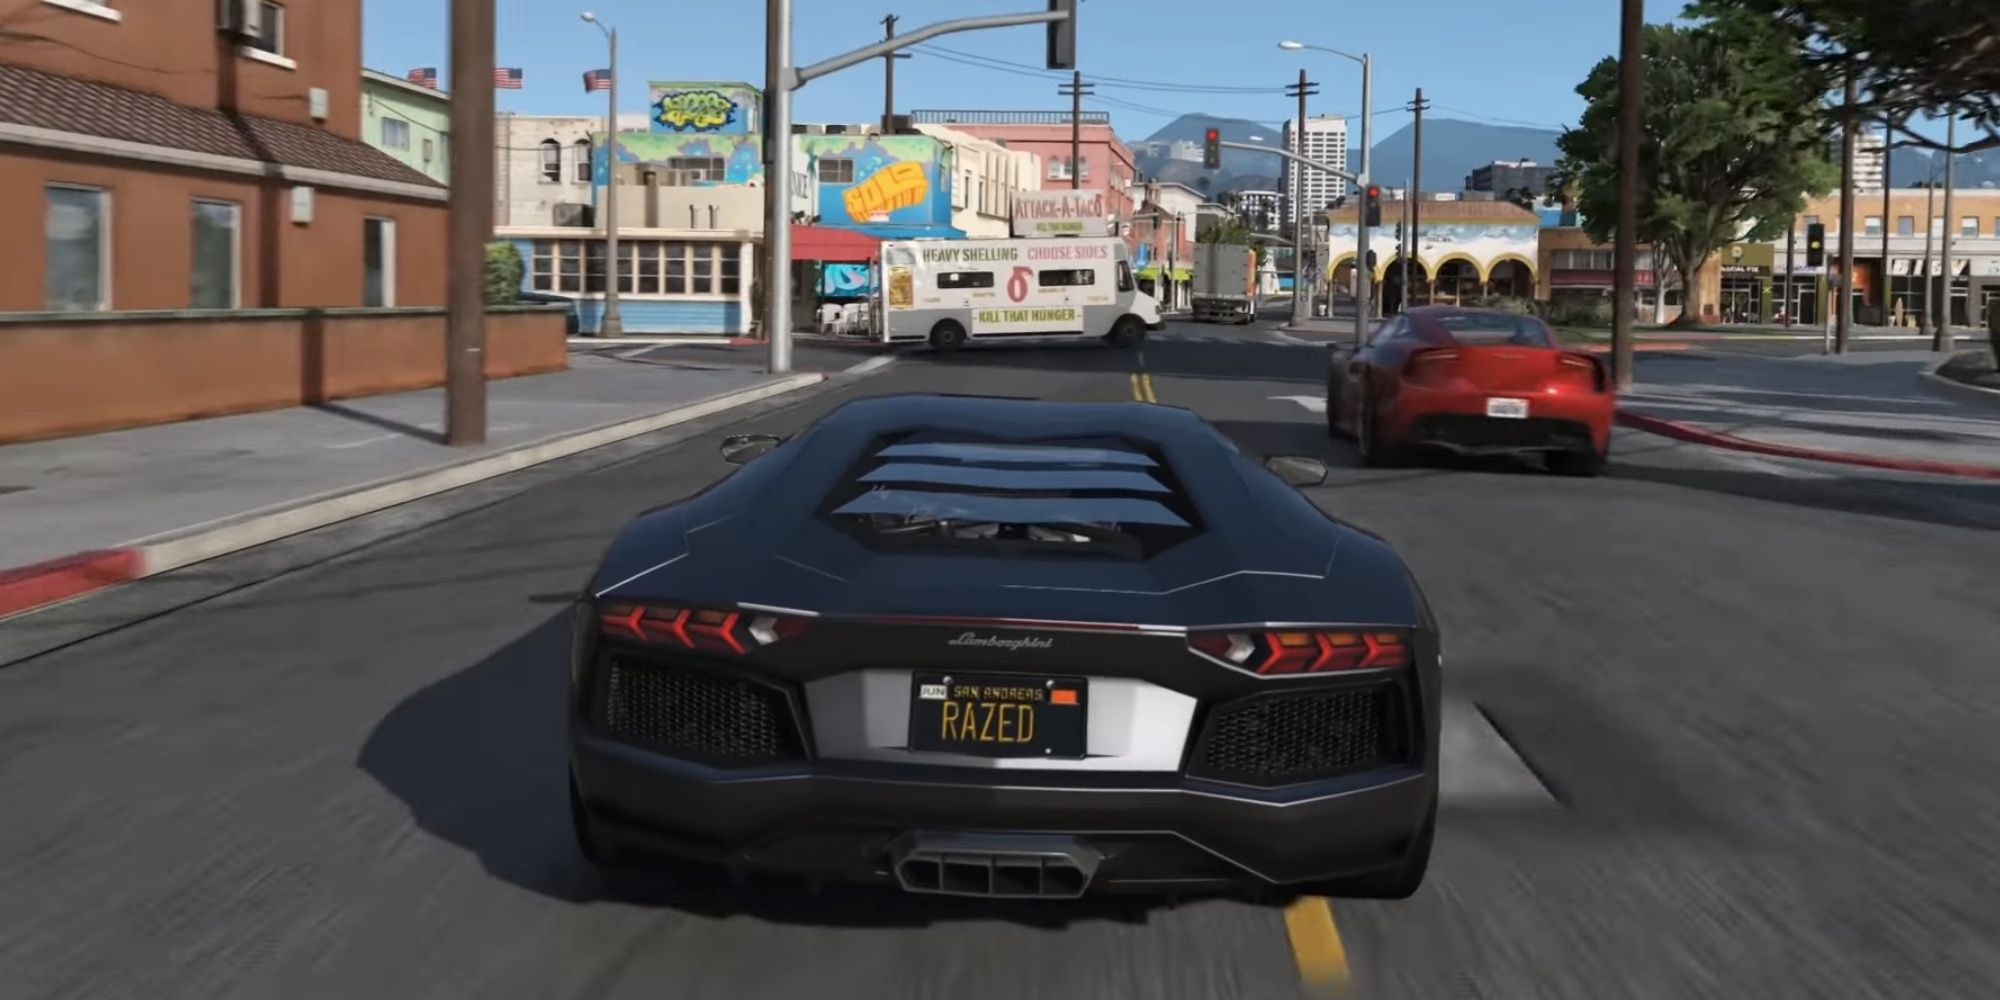 GTA 5: Best Mods To Use While Waiting For GTA 6